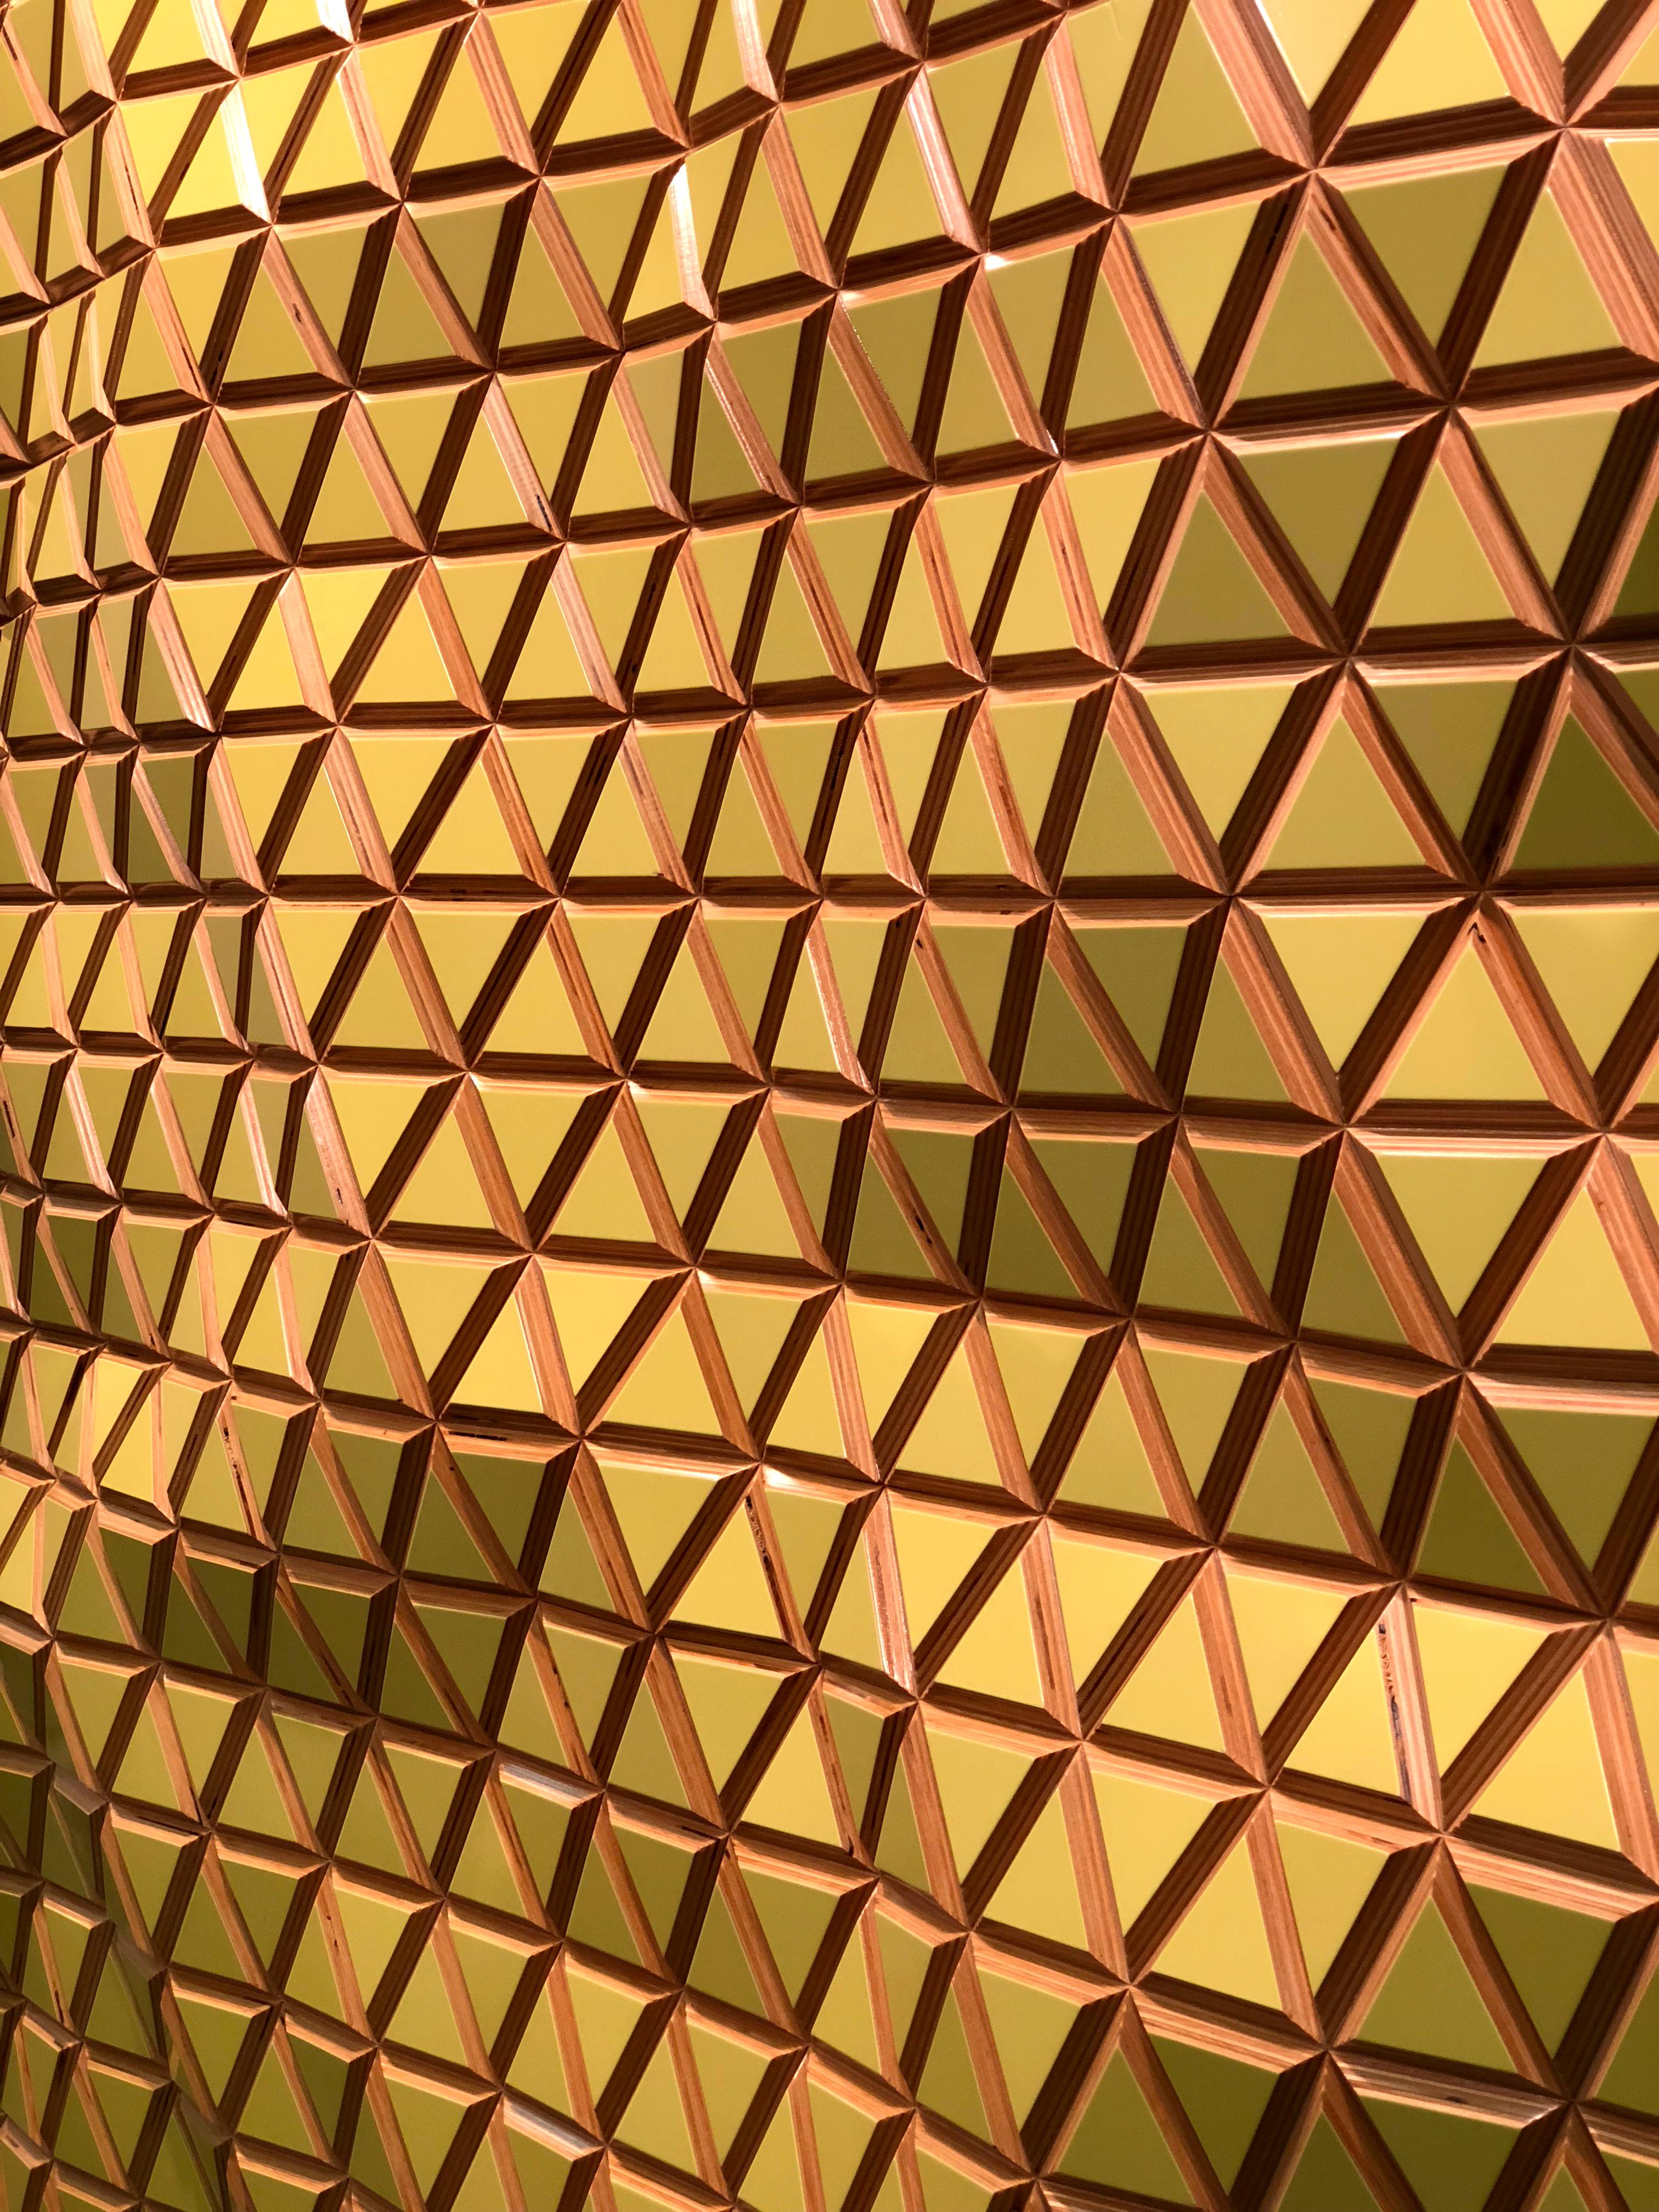 Honeycomb Conjecture, painted carved wood sculptural wall, parametric design - Contemporary Sculpture by Hugo Garcia-Urrutia